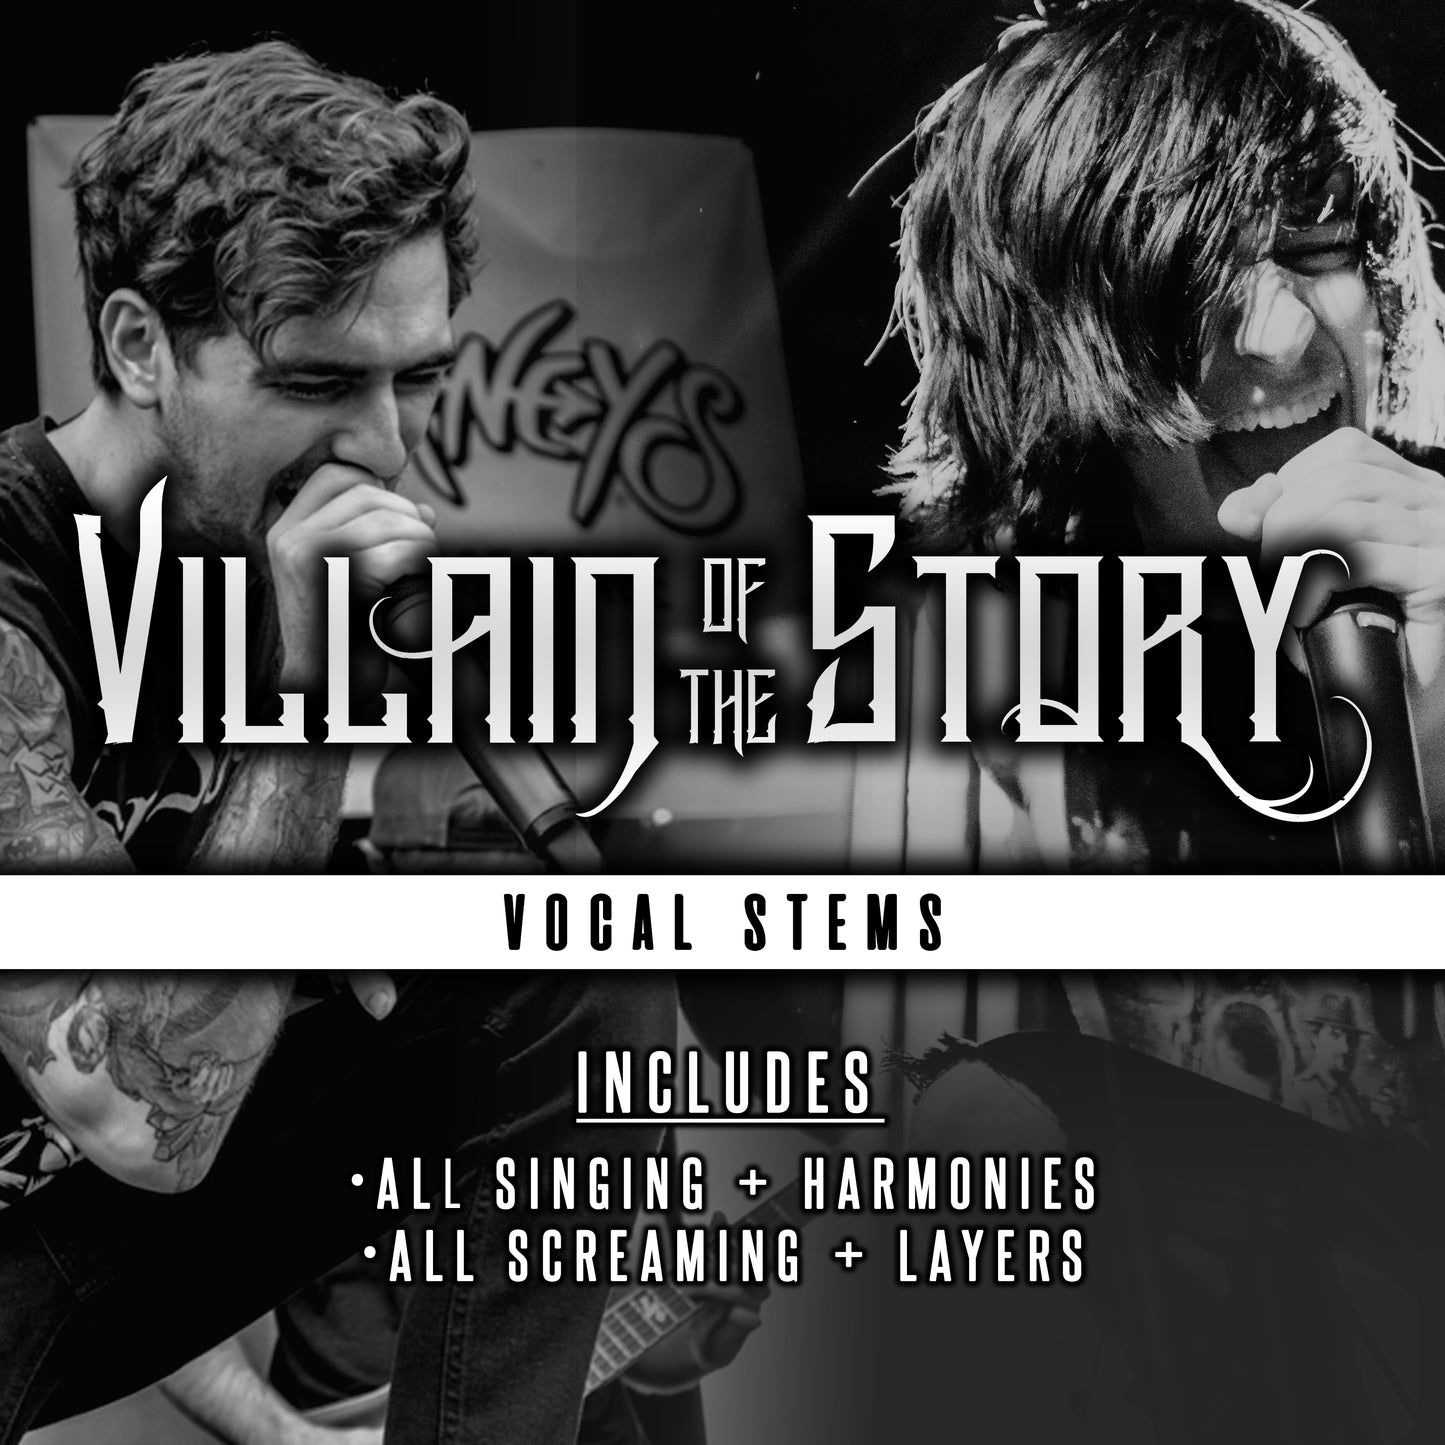 Never Coming Back - Vocal Stems